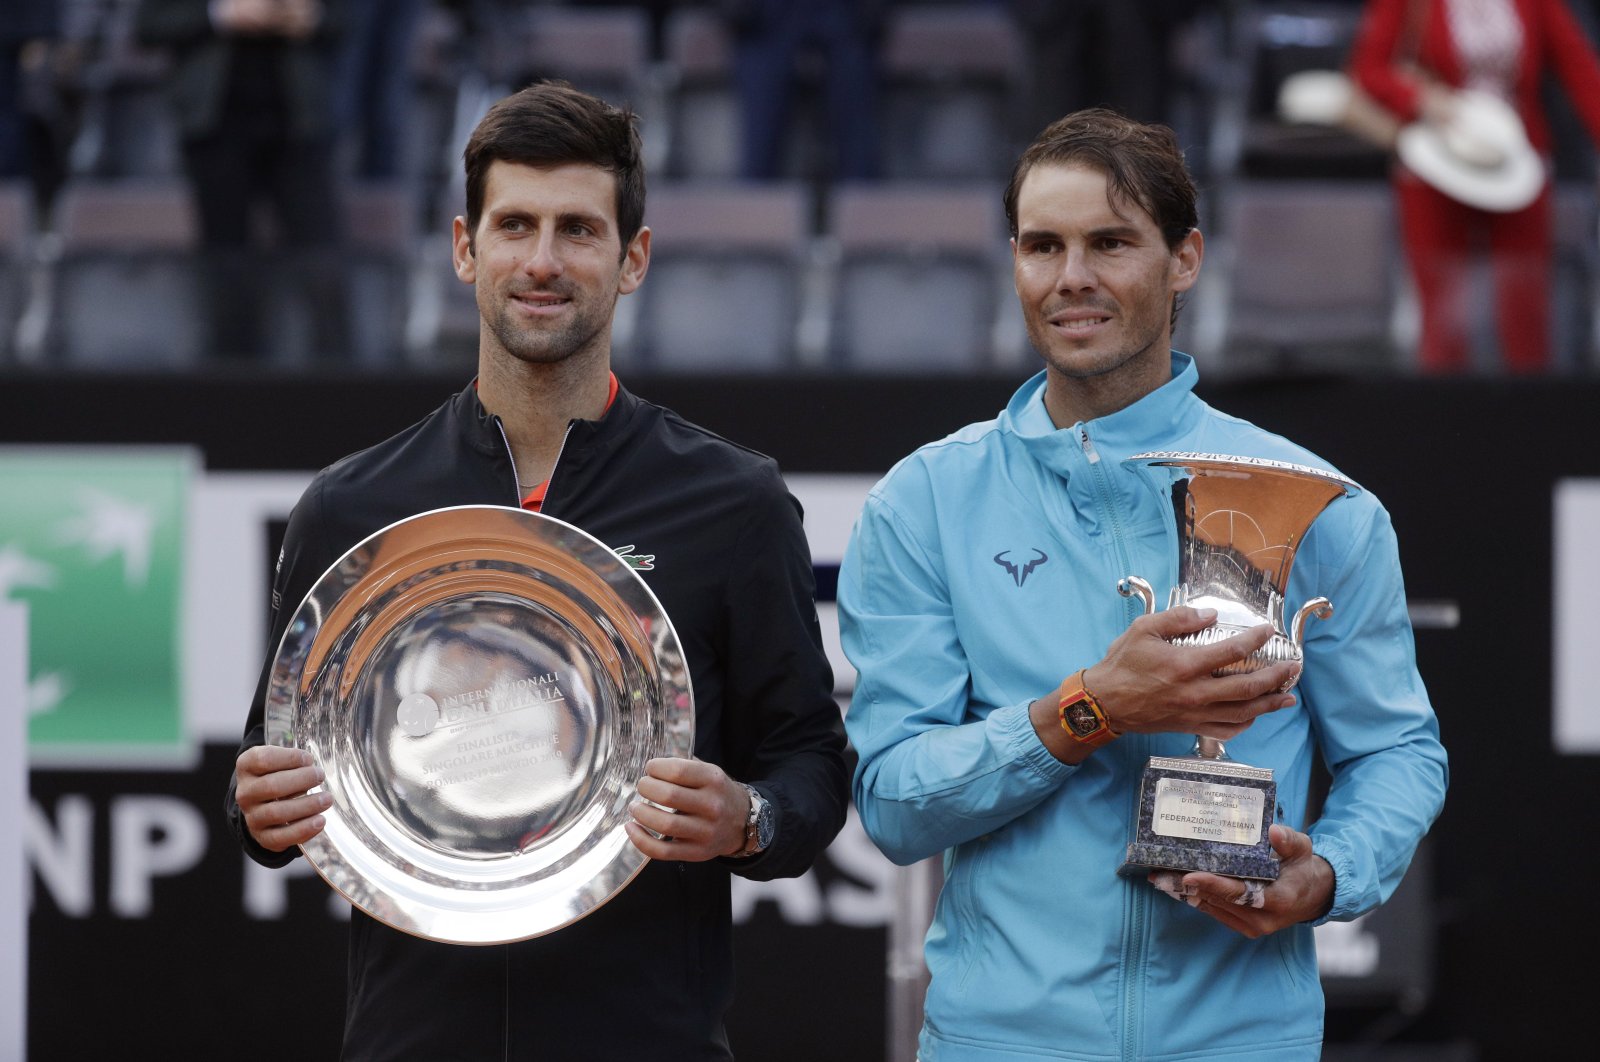 Rafael Nadal (R) and Novak Djokovic pose with their trophies at the end of the Italian Open tennis tournament, in Rome, Italy, May 19, 2019. (AP Photo)